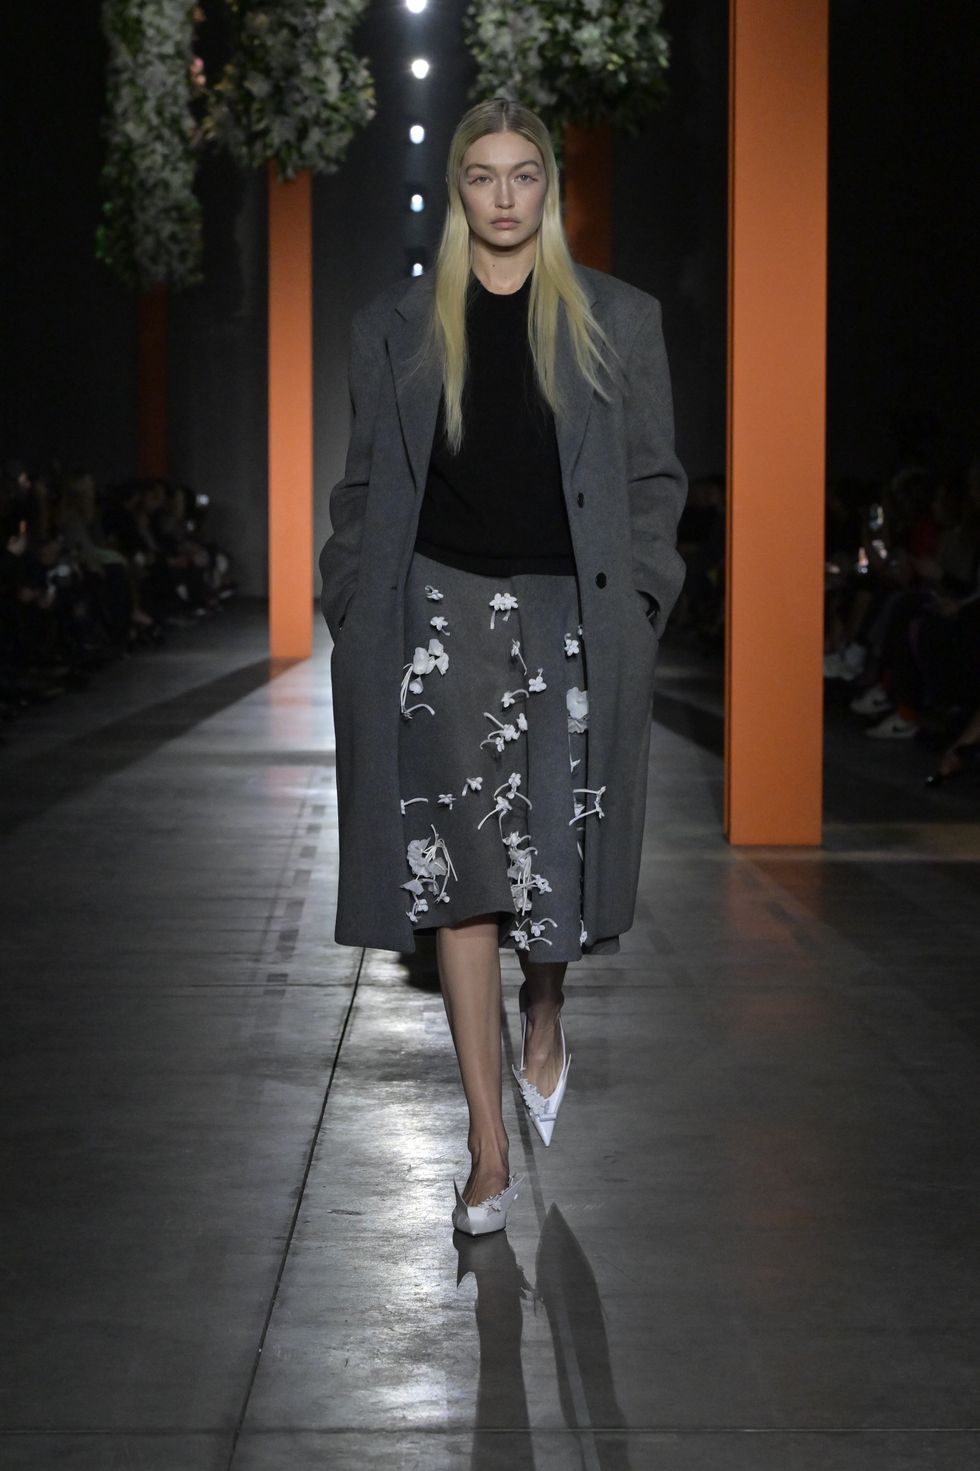 gigi hadid on the runway at prada fall 2023 ready to wear fashion show on february 23, 2023 at prada headquarters in milan, italy photo by giovanni giannoniwwd via getty images